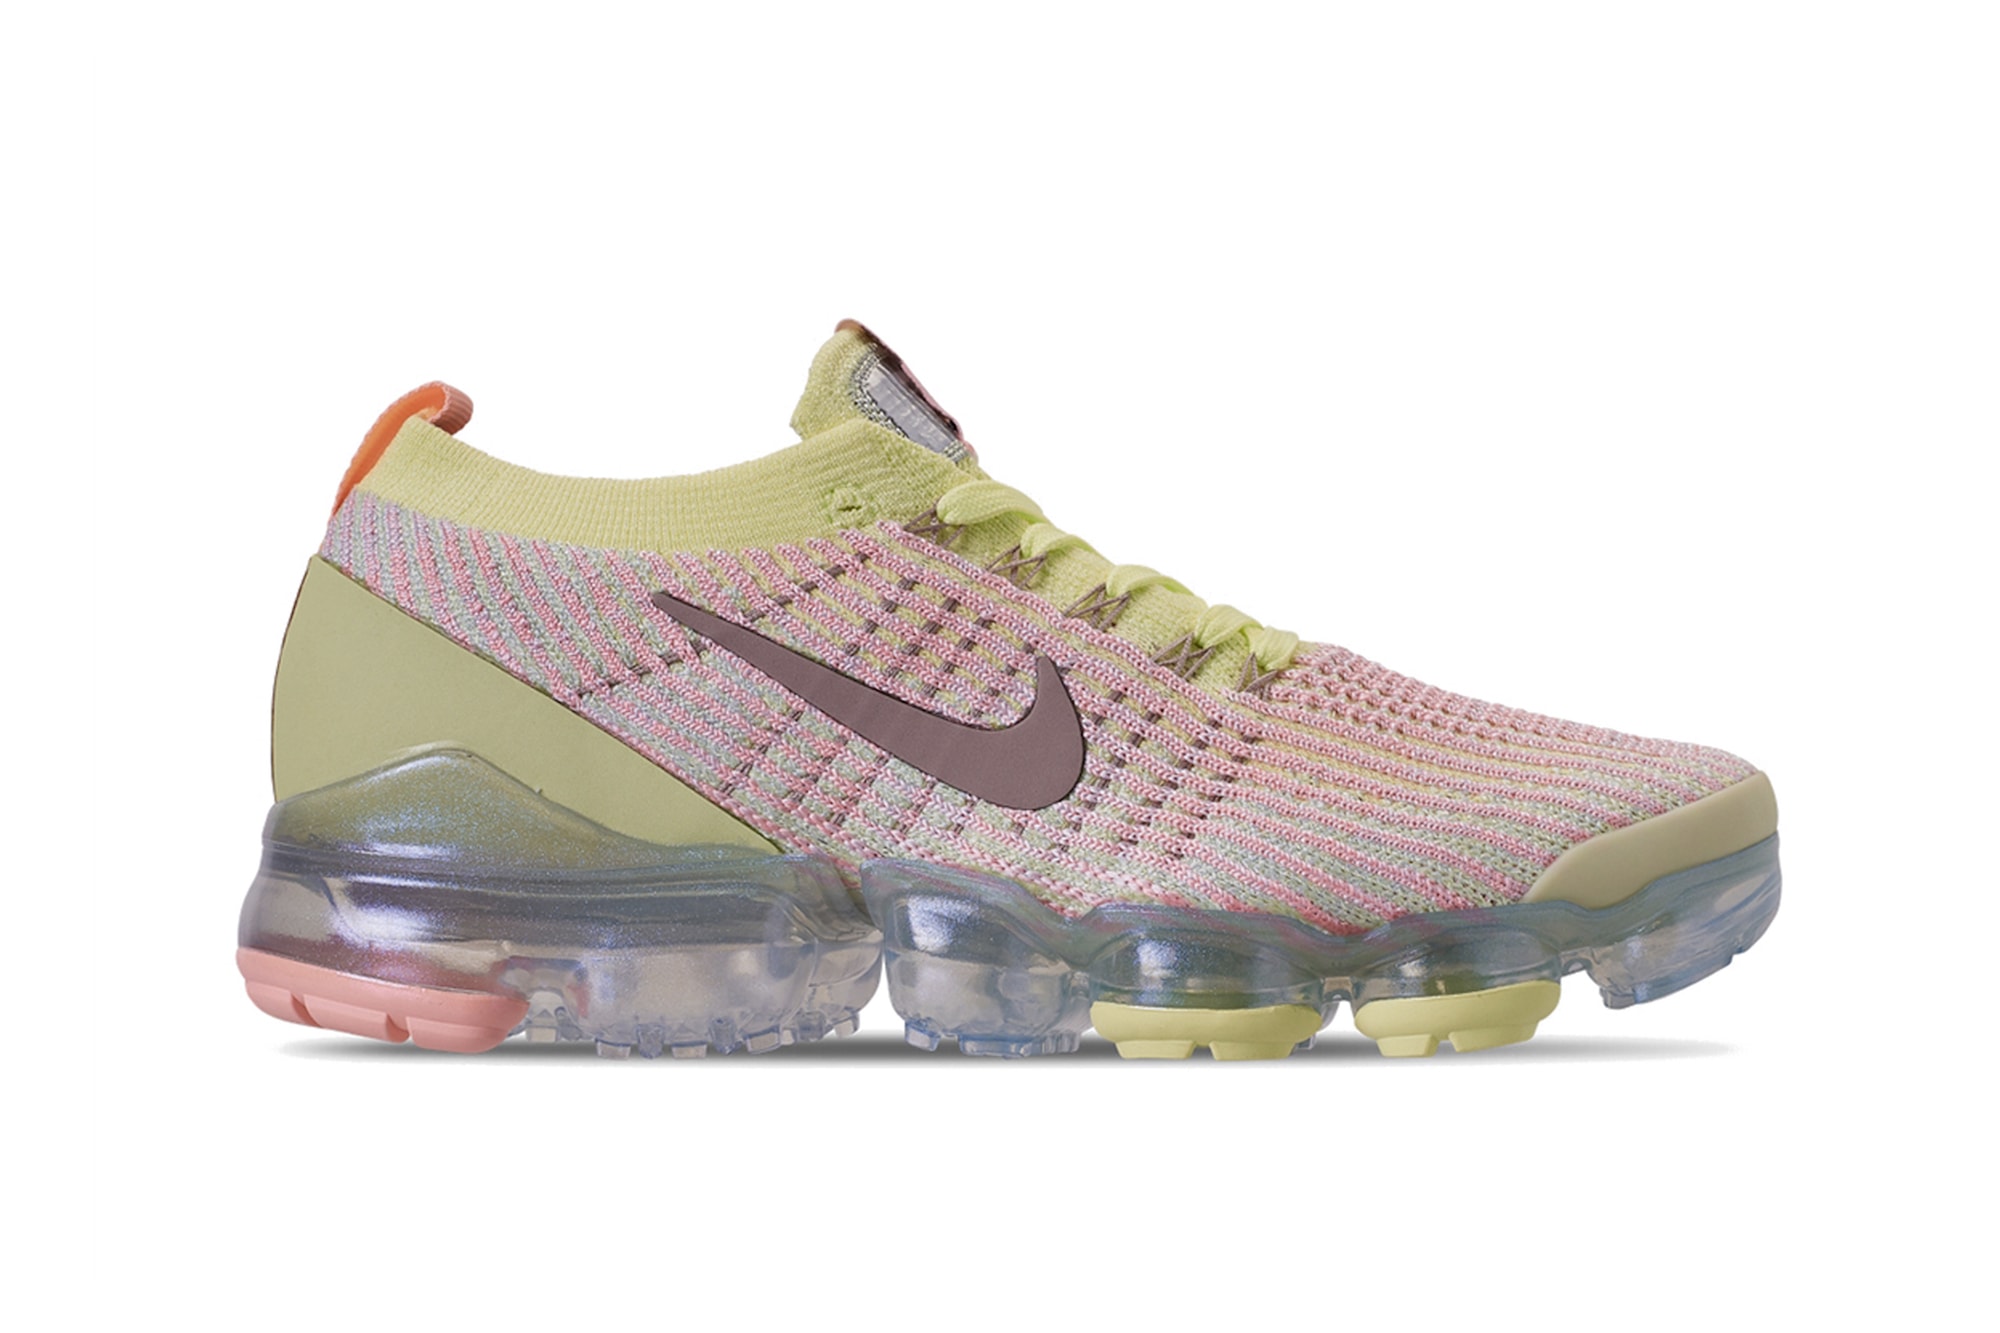 Nike Air VaporMax Flyknit 3.0 "Easter" Drop Sneaker Shoe Spring Color Pastel Trainer